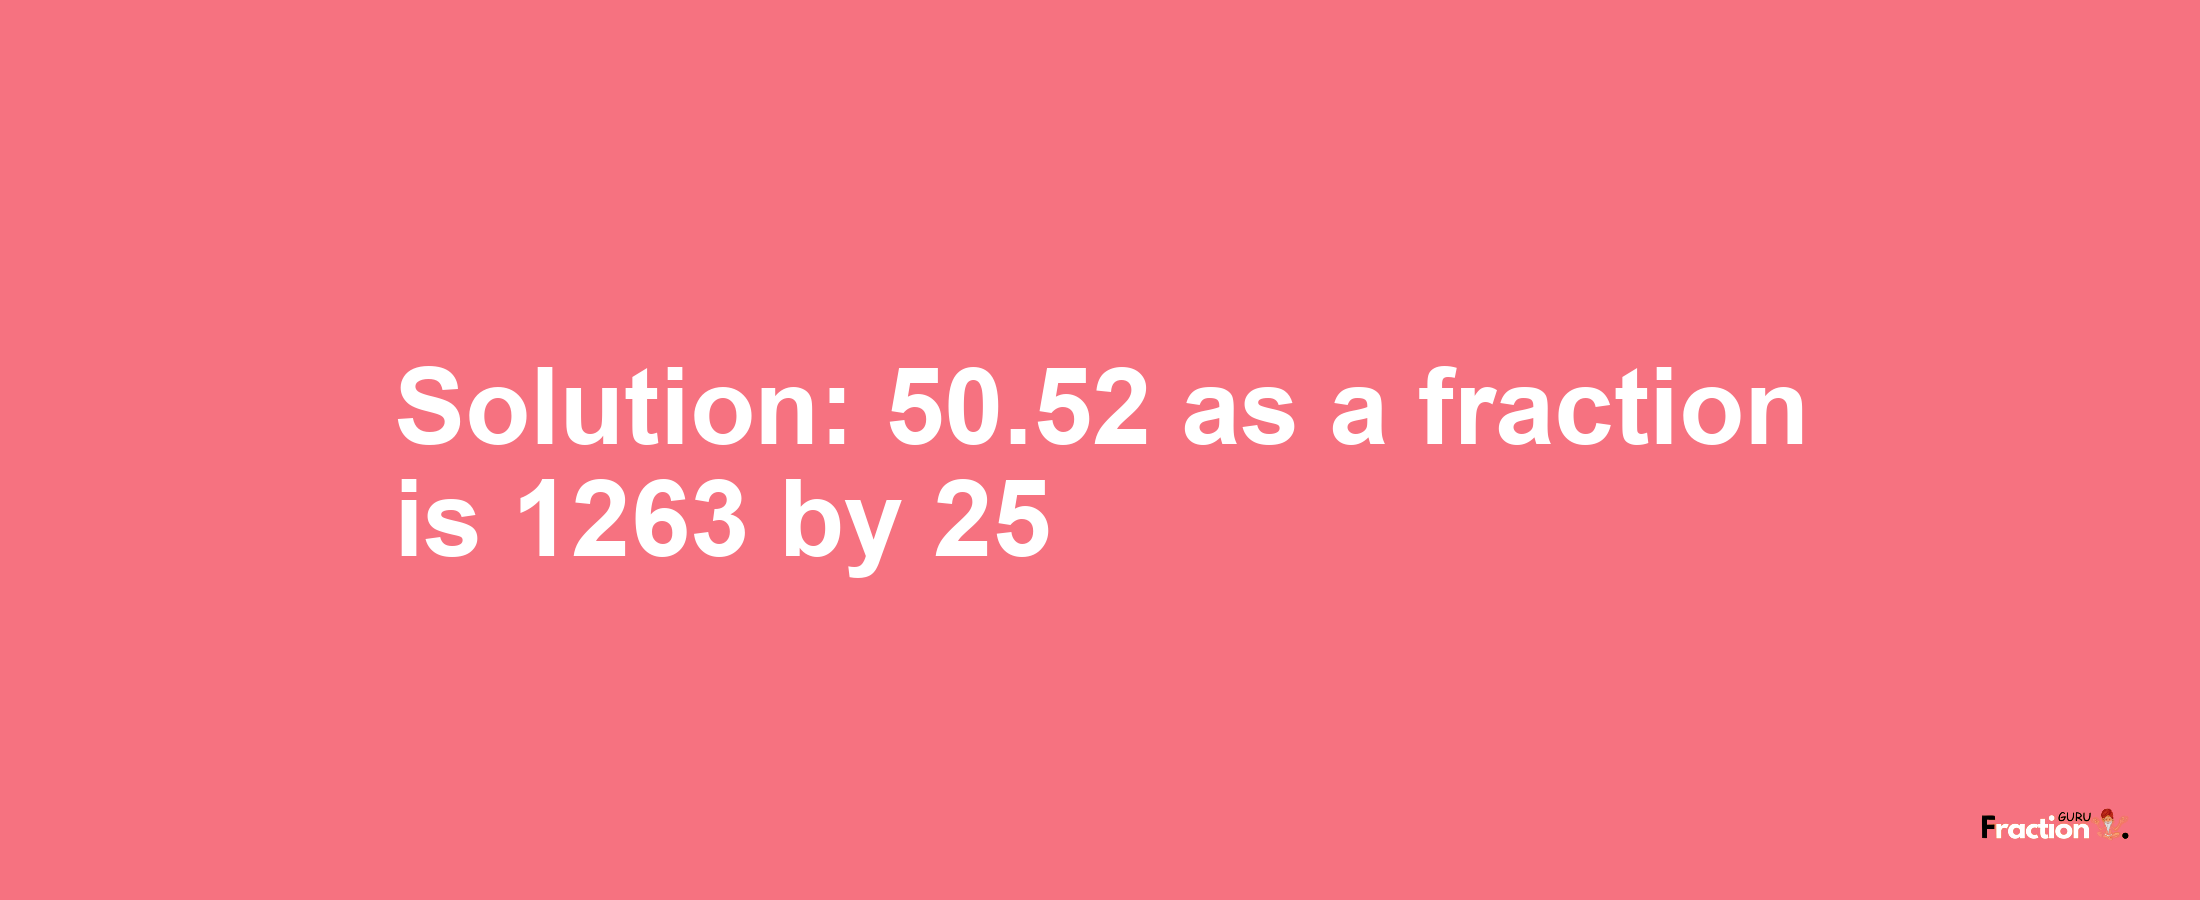 Solution:50.52 as a fraction is 1263/25